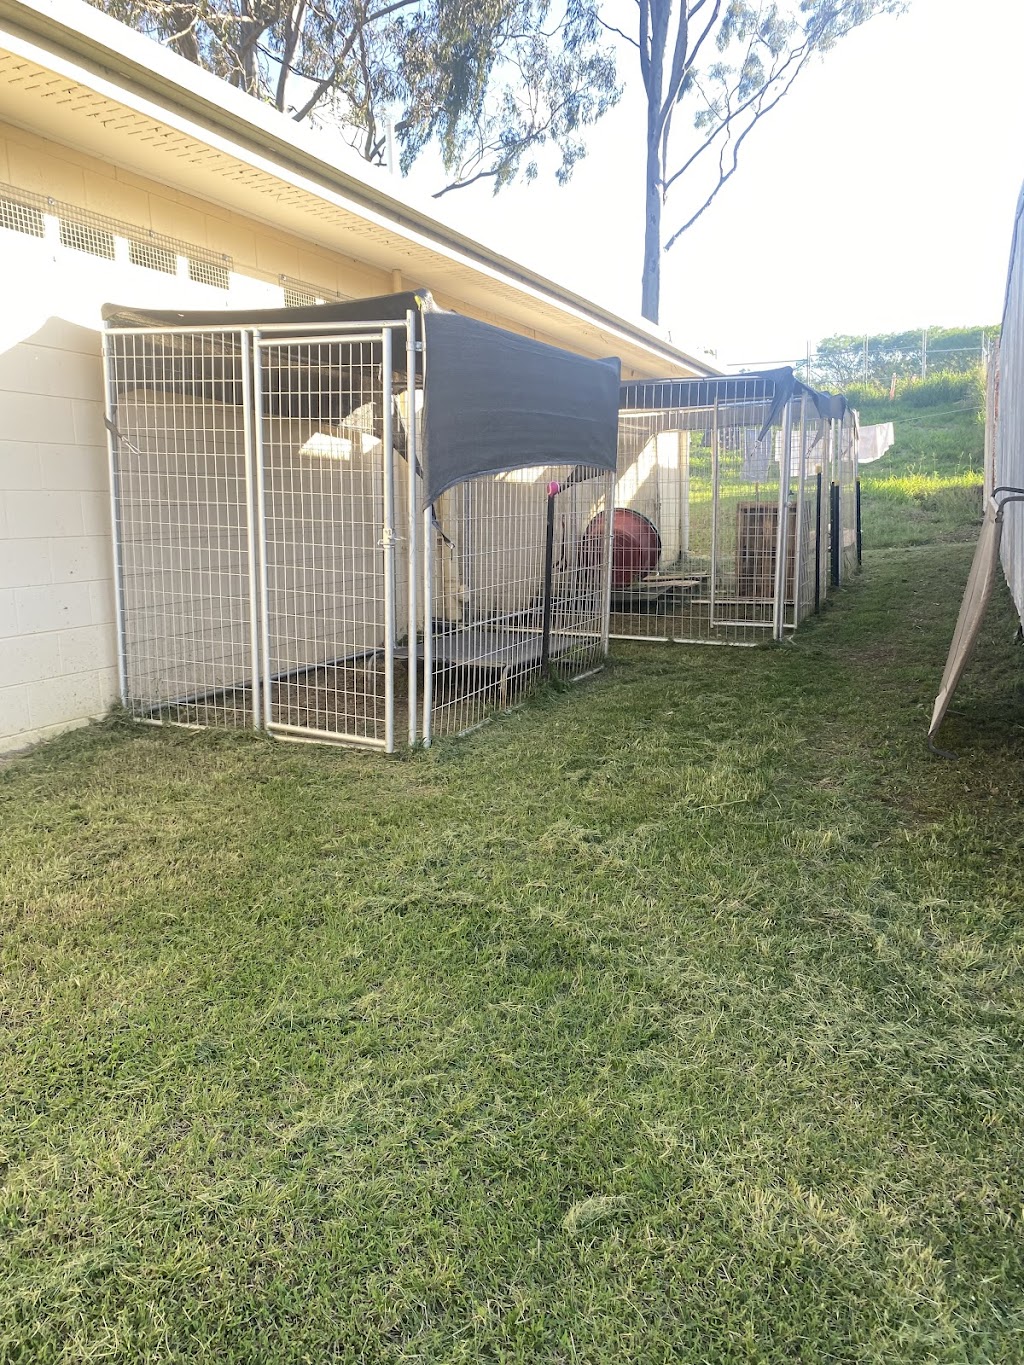 Brave Companion Dog Rescue Inc |  | 2107 Laidley Rosewood Rd, Laidley QLD 4341, Australia | 0491727449 OR +61 491 727 449